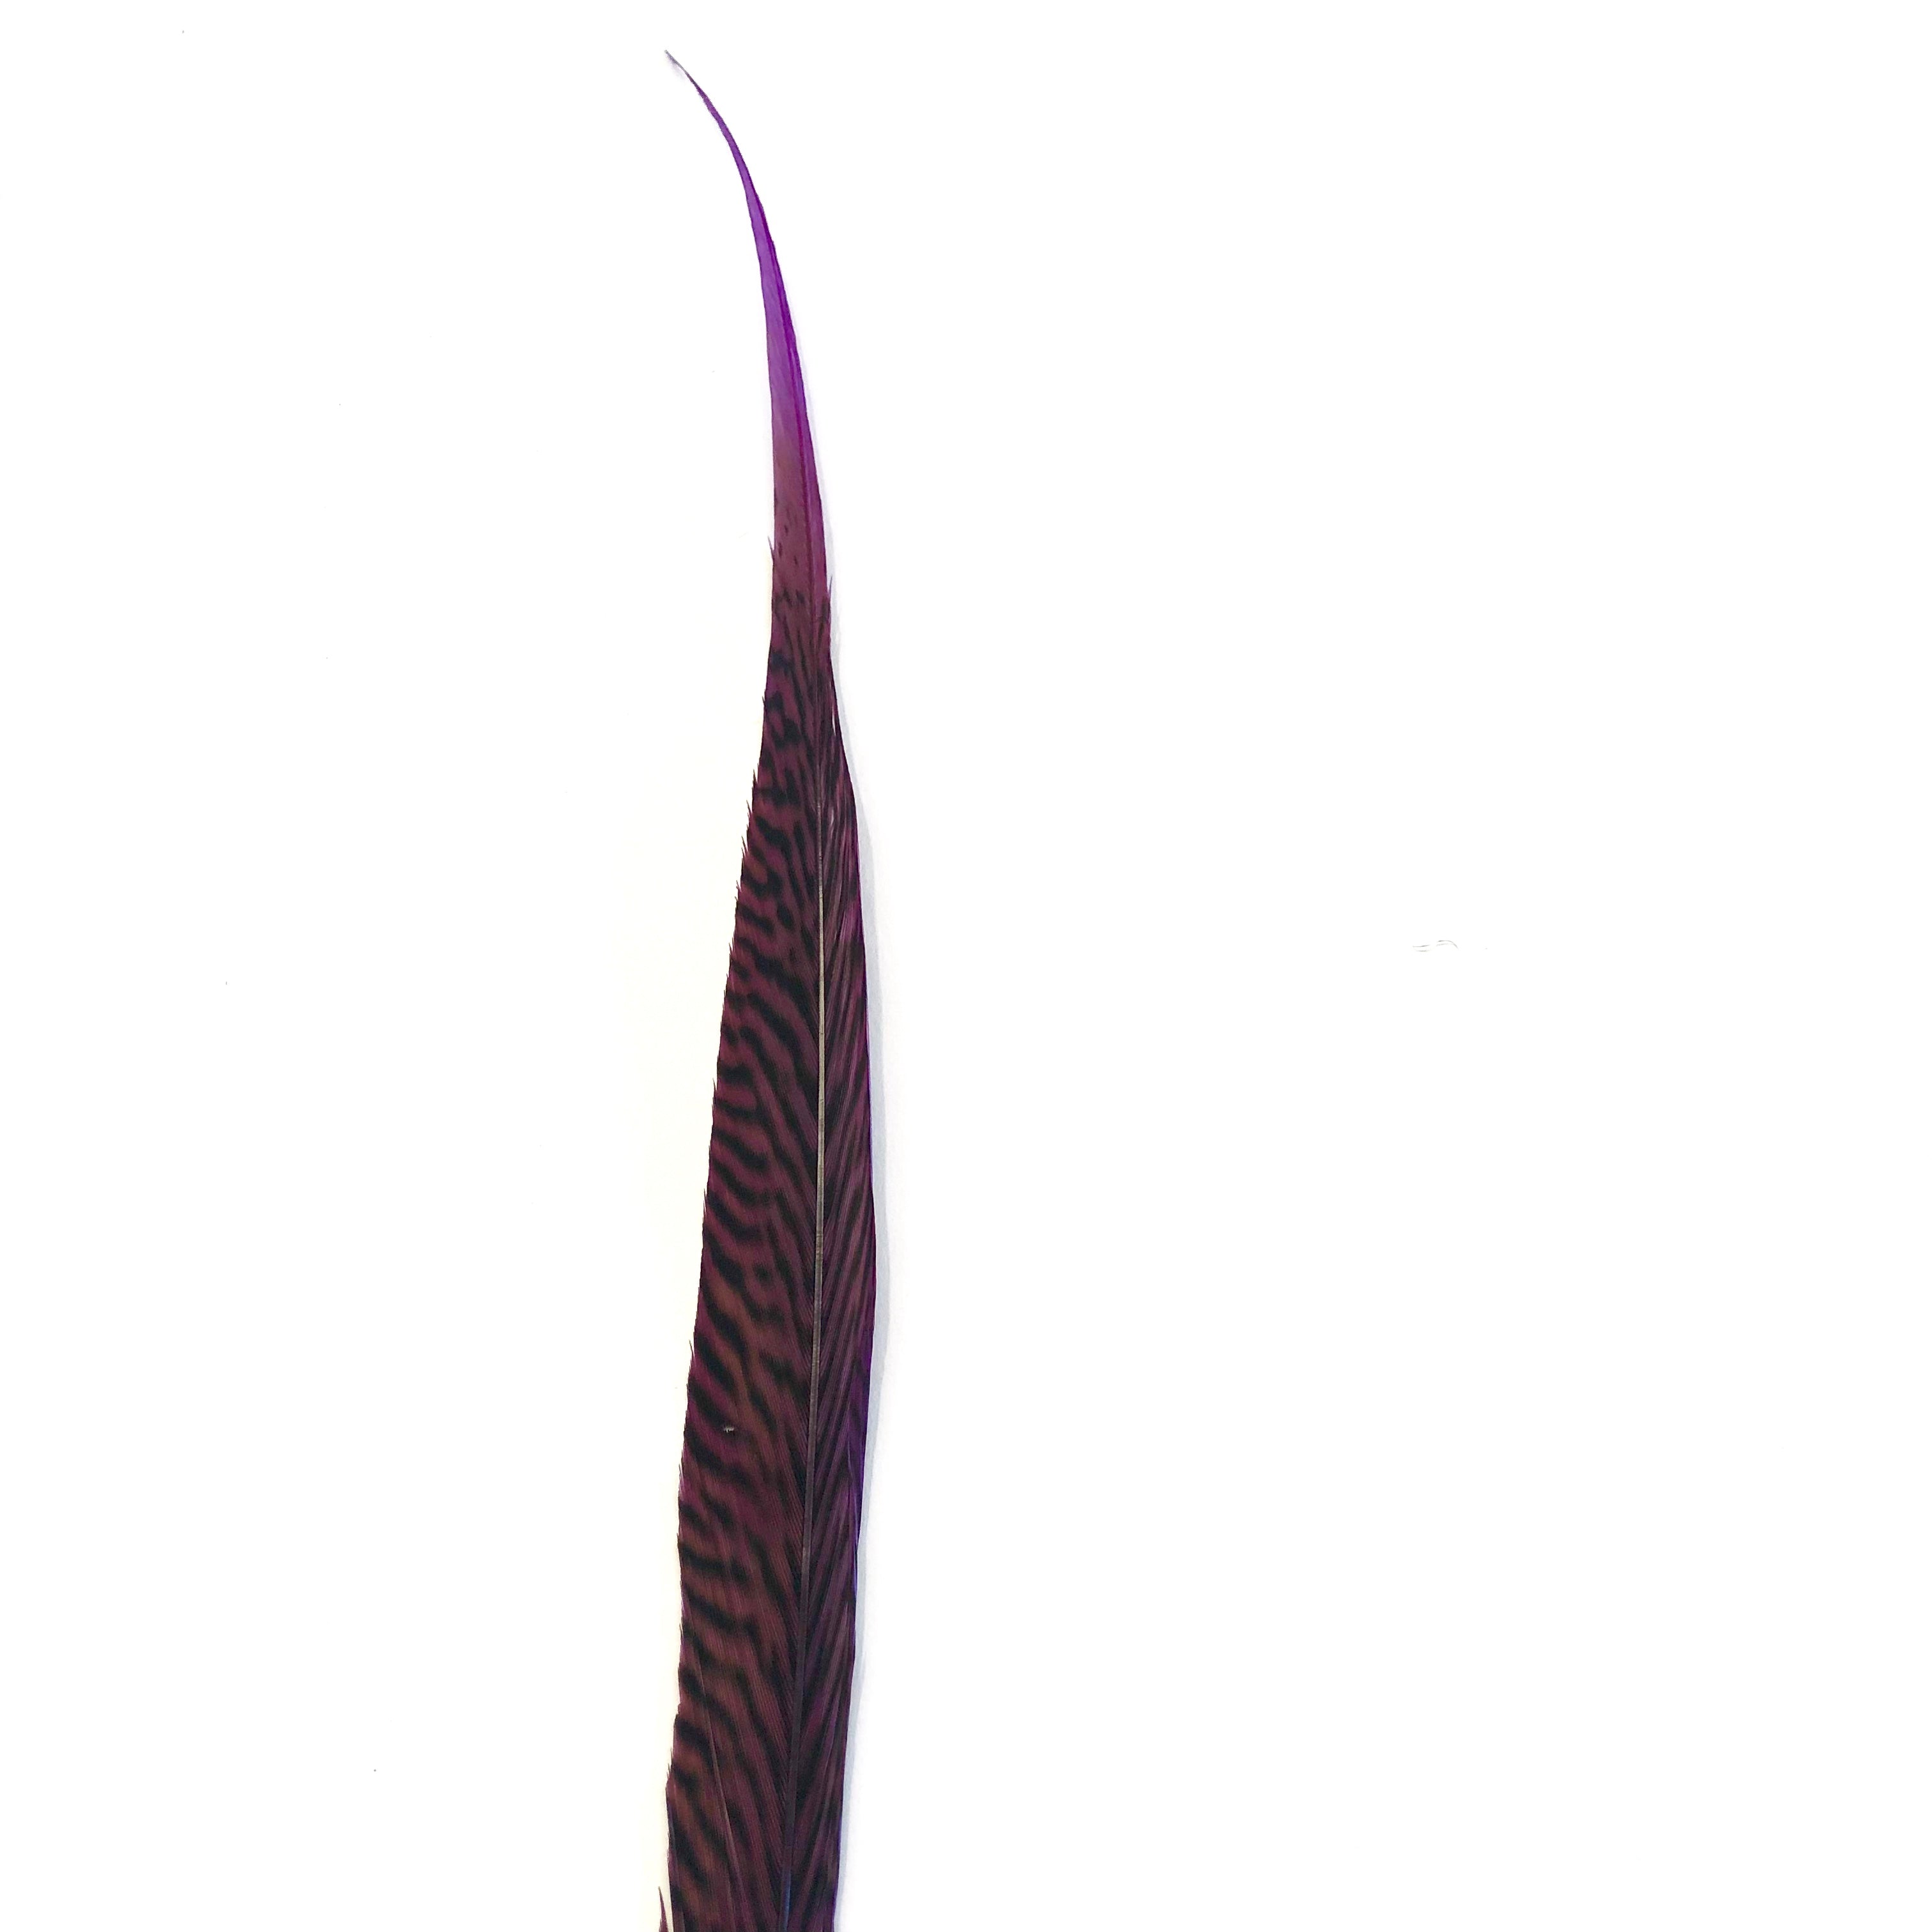 10" to 20" Golden Pheasant Side Tail Feather - Eggplant